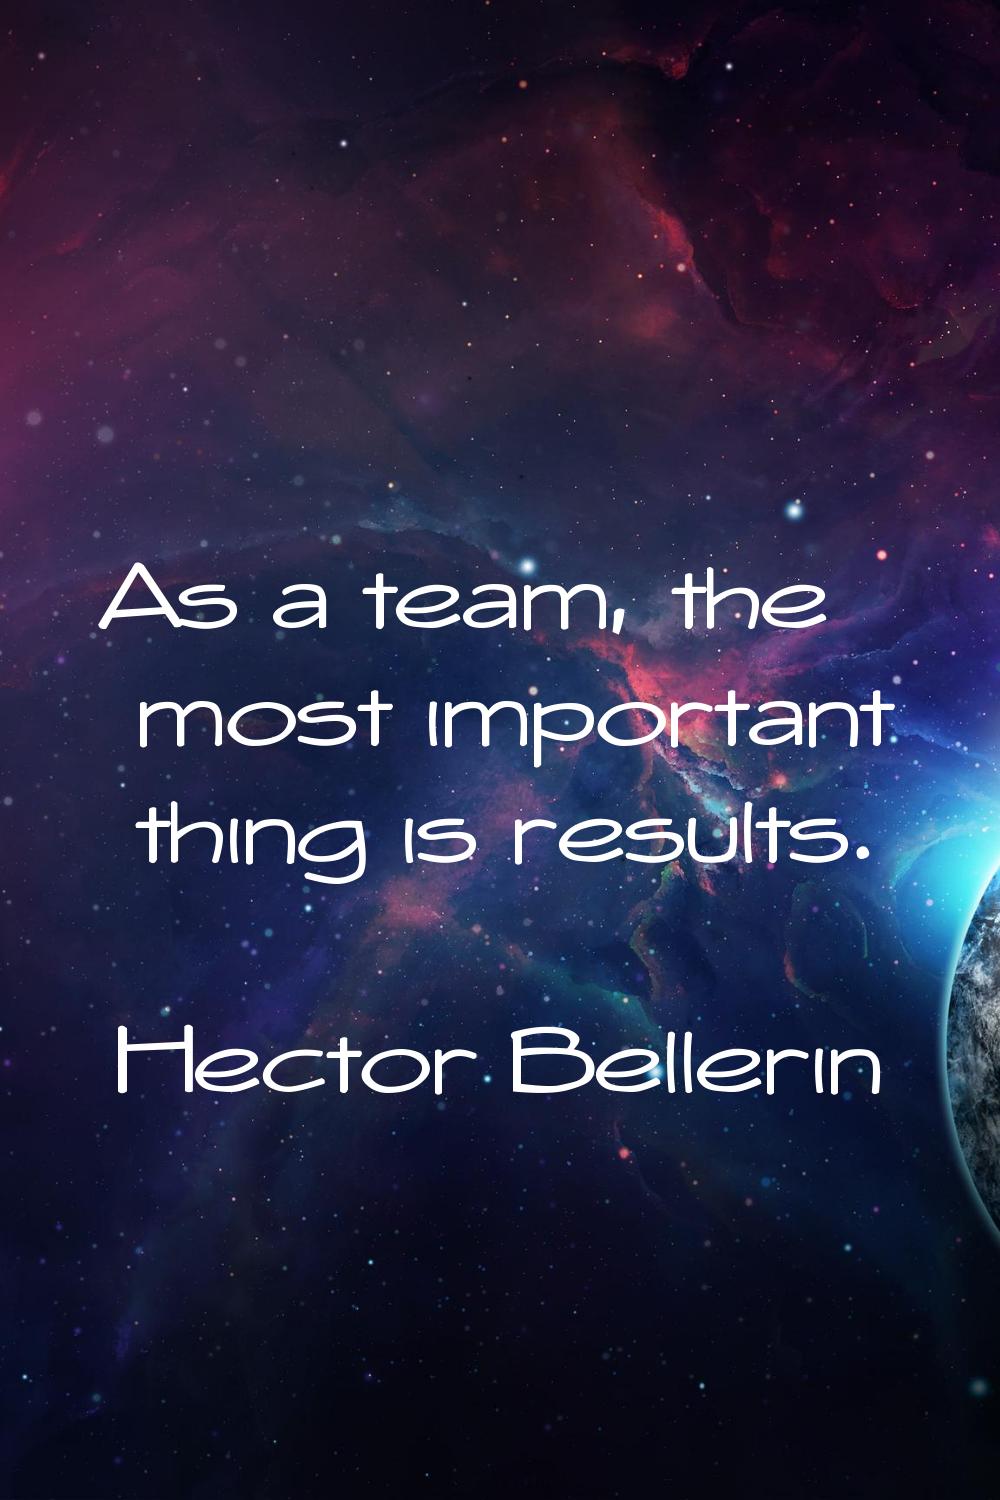 As a team, the most important thing is results.